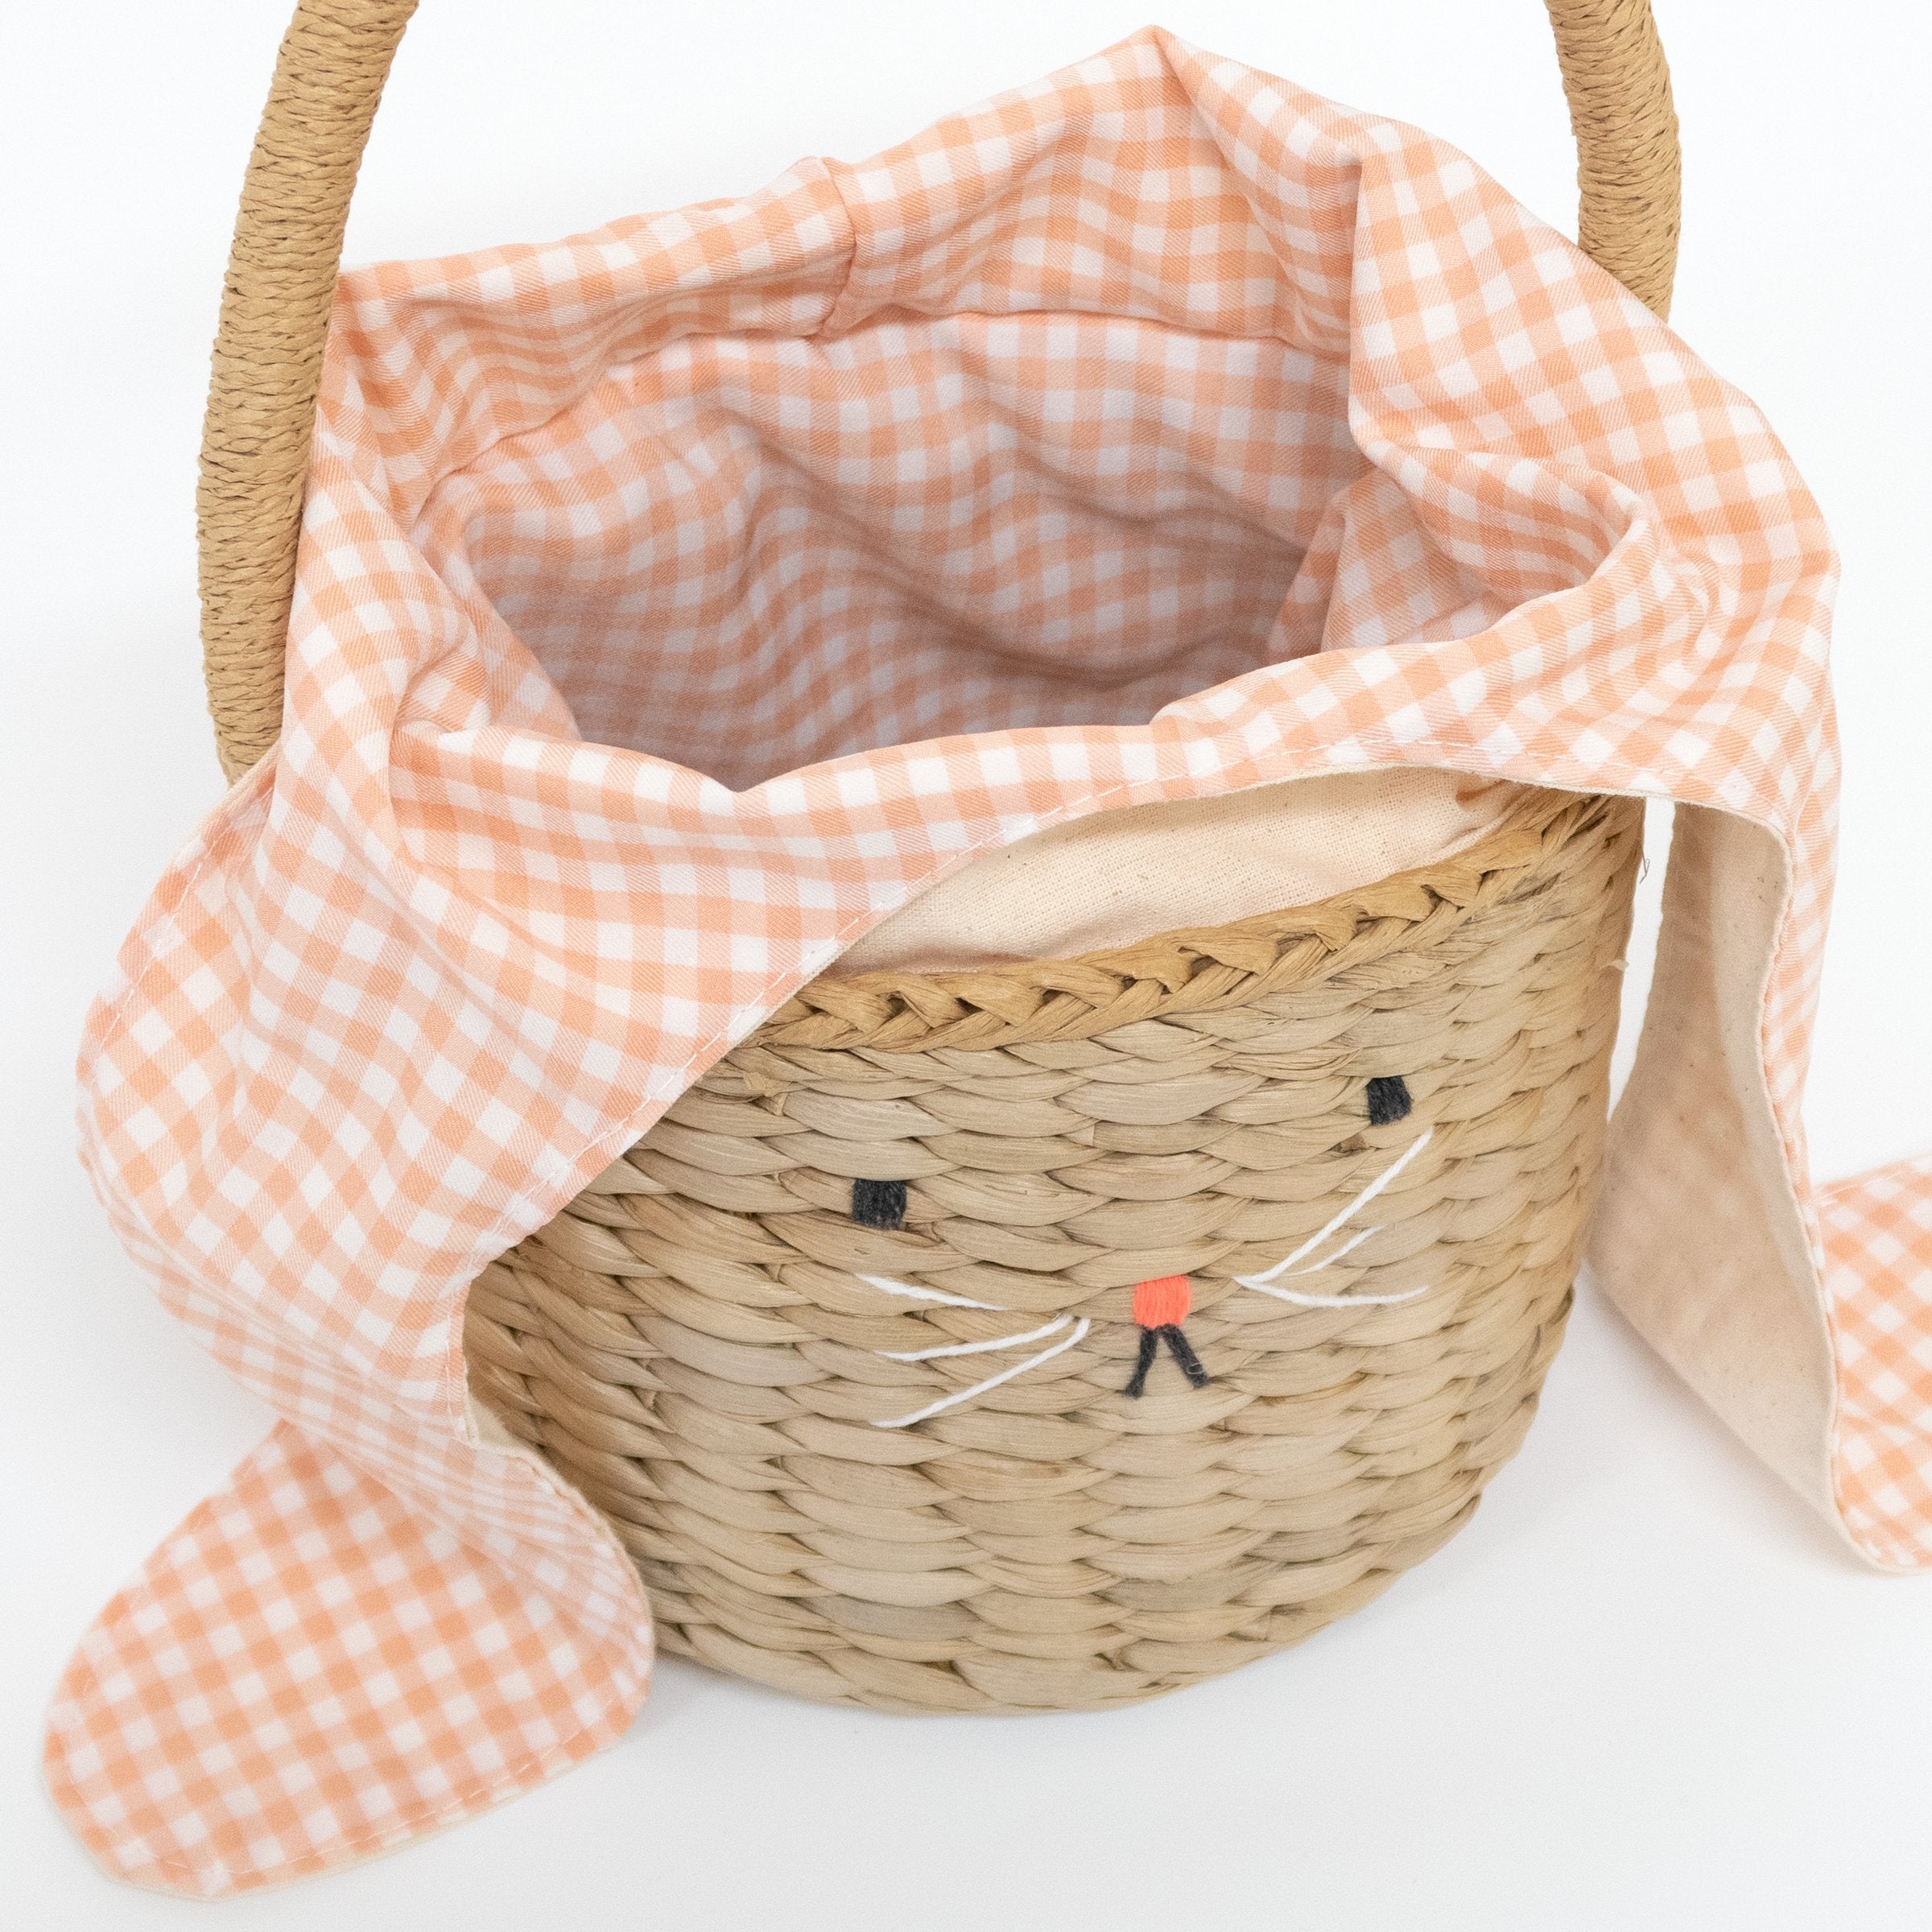 This basket is crafted from woven straw, with floppy ears, a sweet bunny face and a dellightful pompom tail.